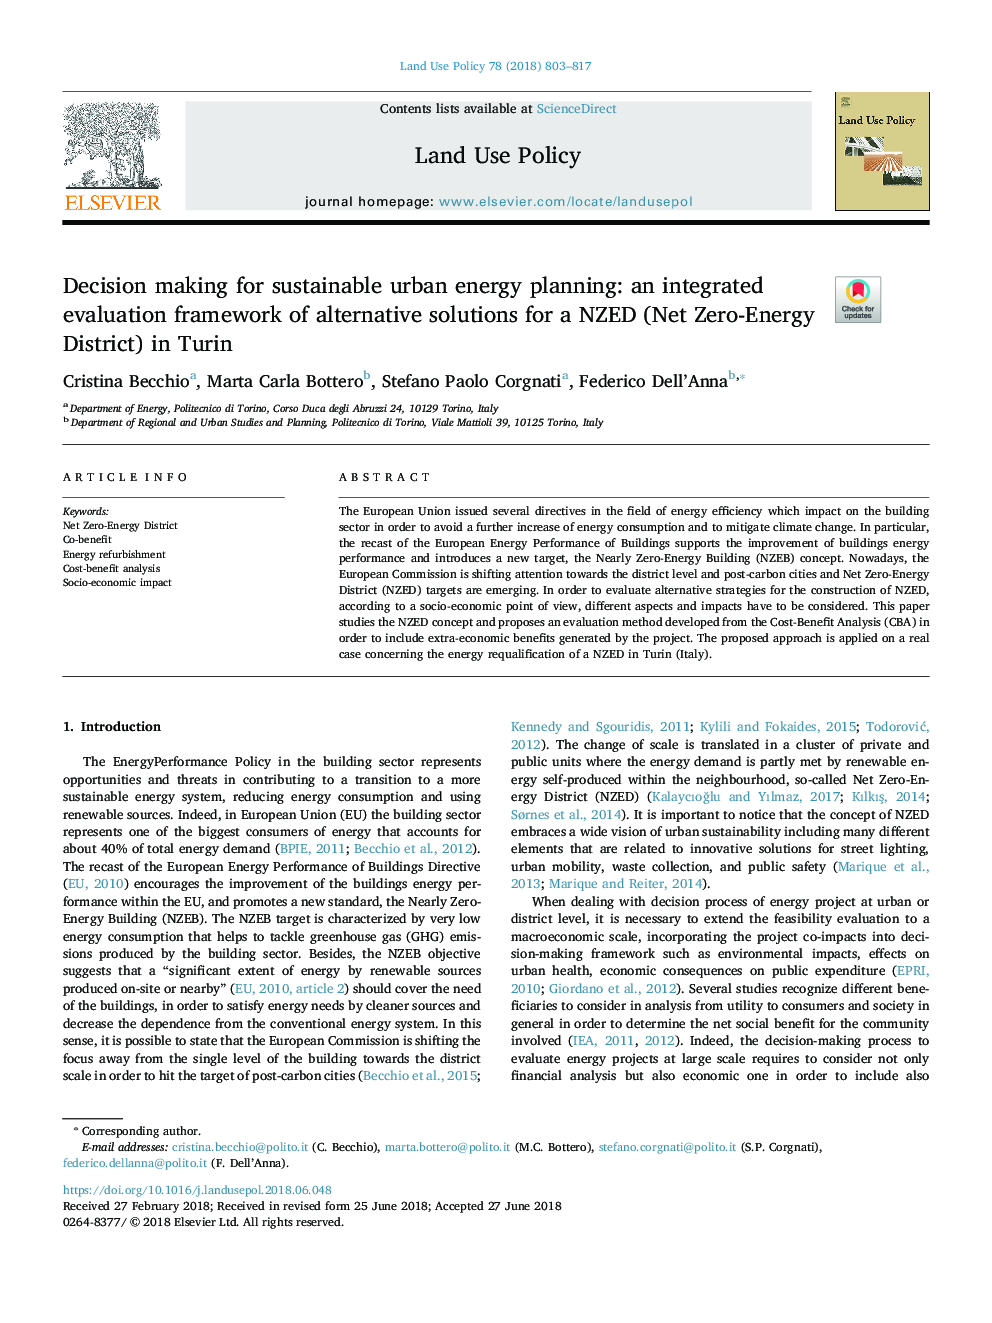 Decision making for sustainable urban energy planning: an integrated evaluation framework of alternative solutions for a NZED (Net Zero-Energy District) in Turin